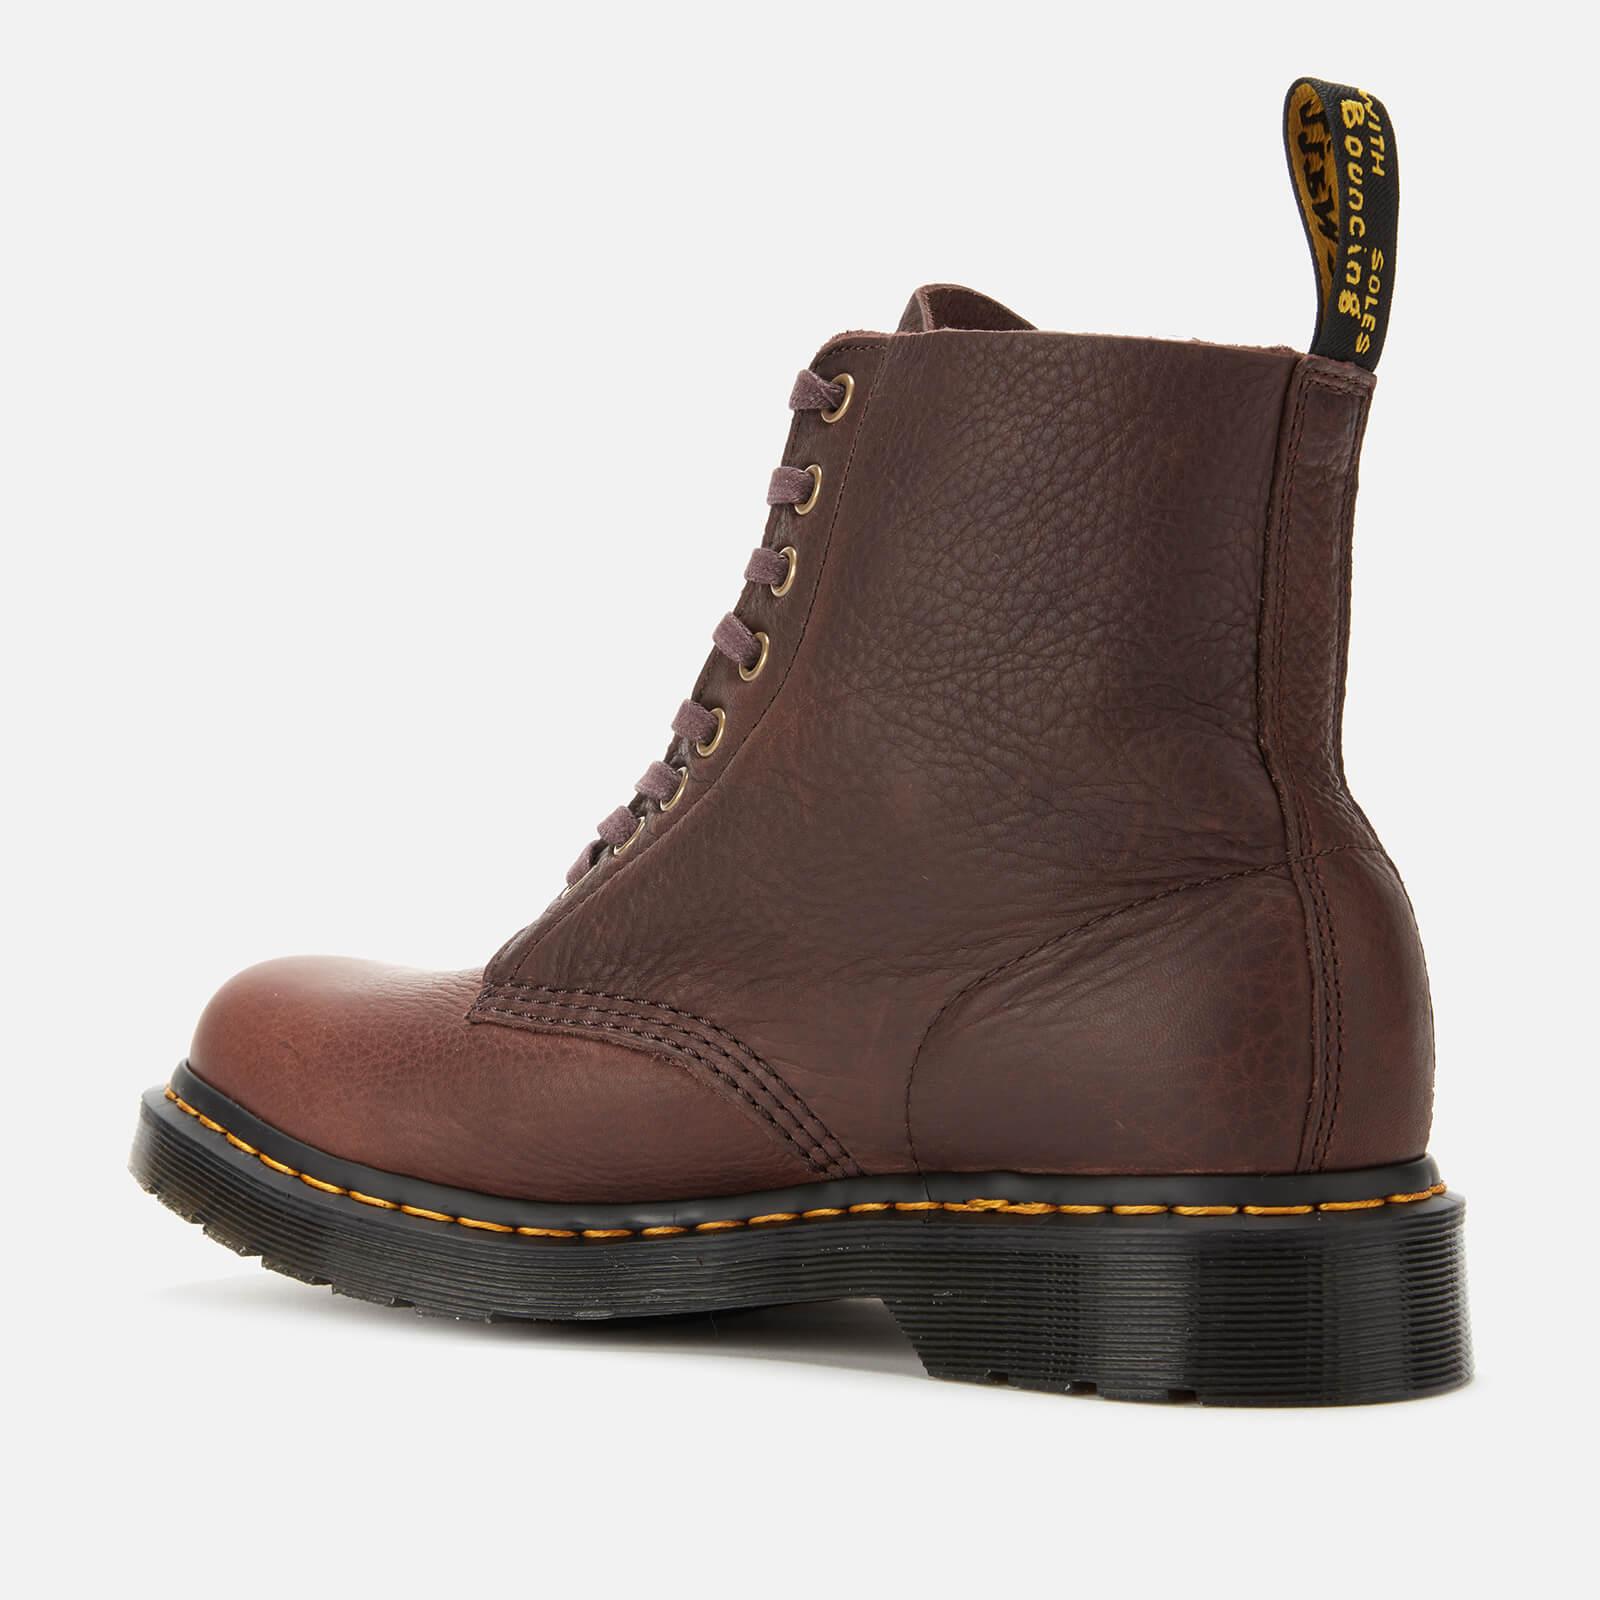 Dr. Martens 1460 Ambassador Soft Leather Pascal 8-eye Boots in Tan (Brown)  for Men - Save 49% | Lyst